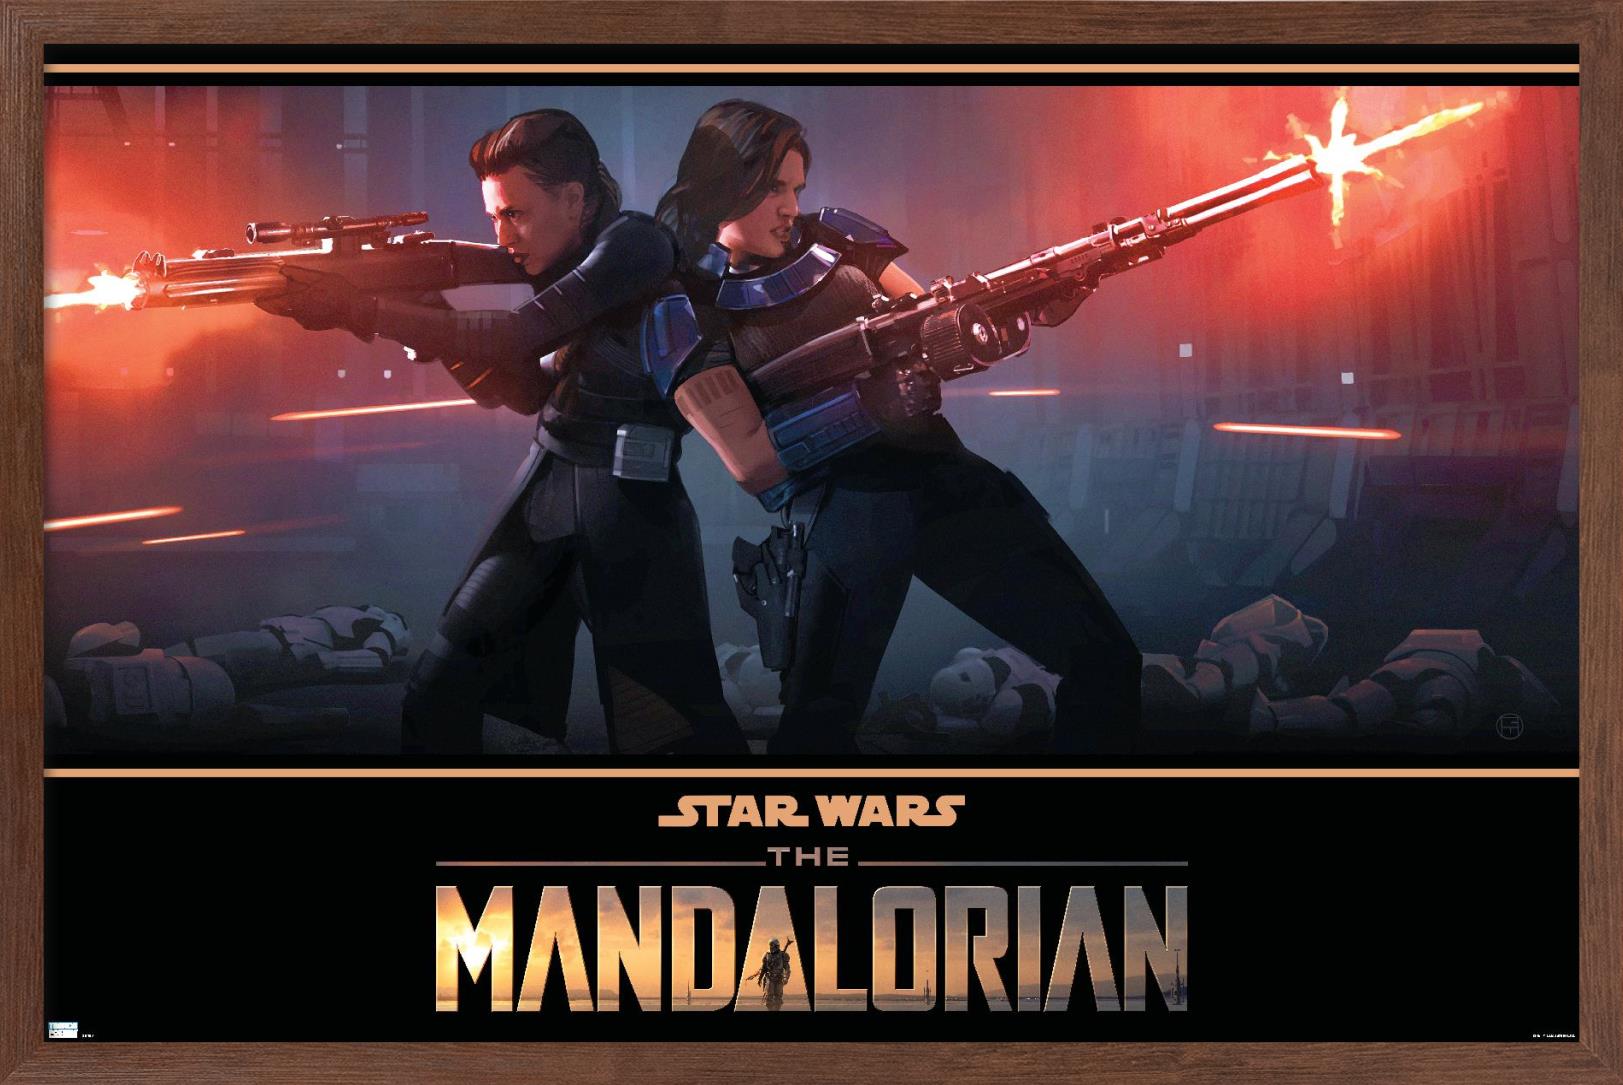 Star Wars: The Mandalorian Season 2 - Back to Back Wall Poster, 14.725" x 22.375", Framed - image 1 of 5